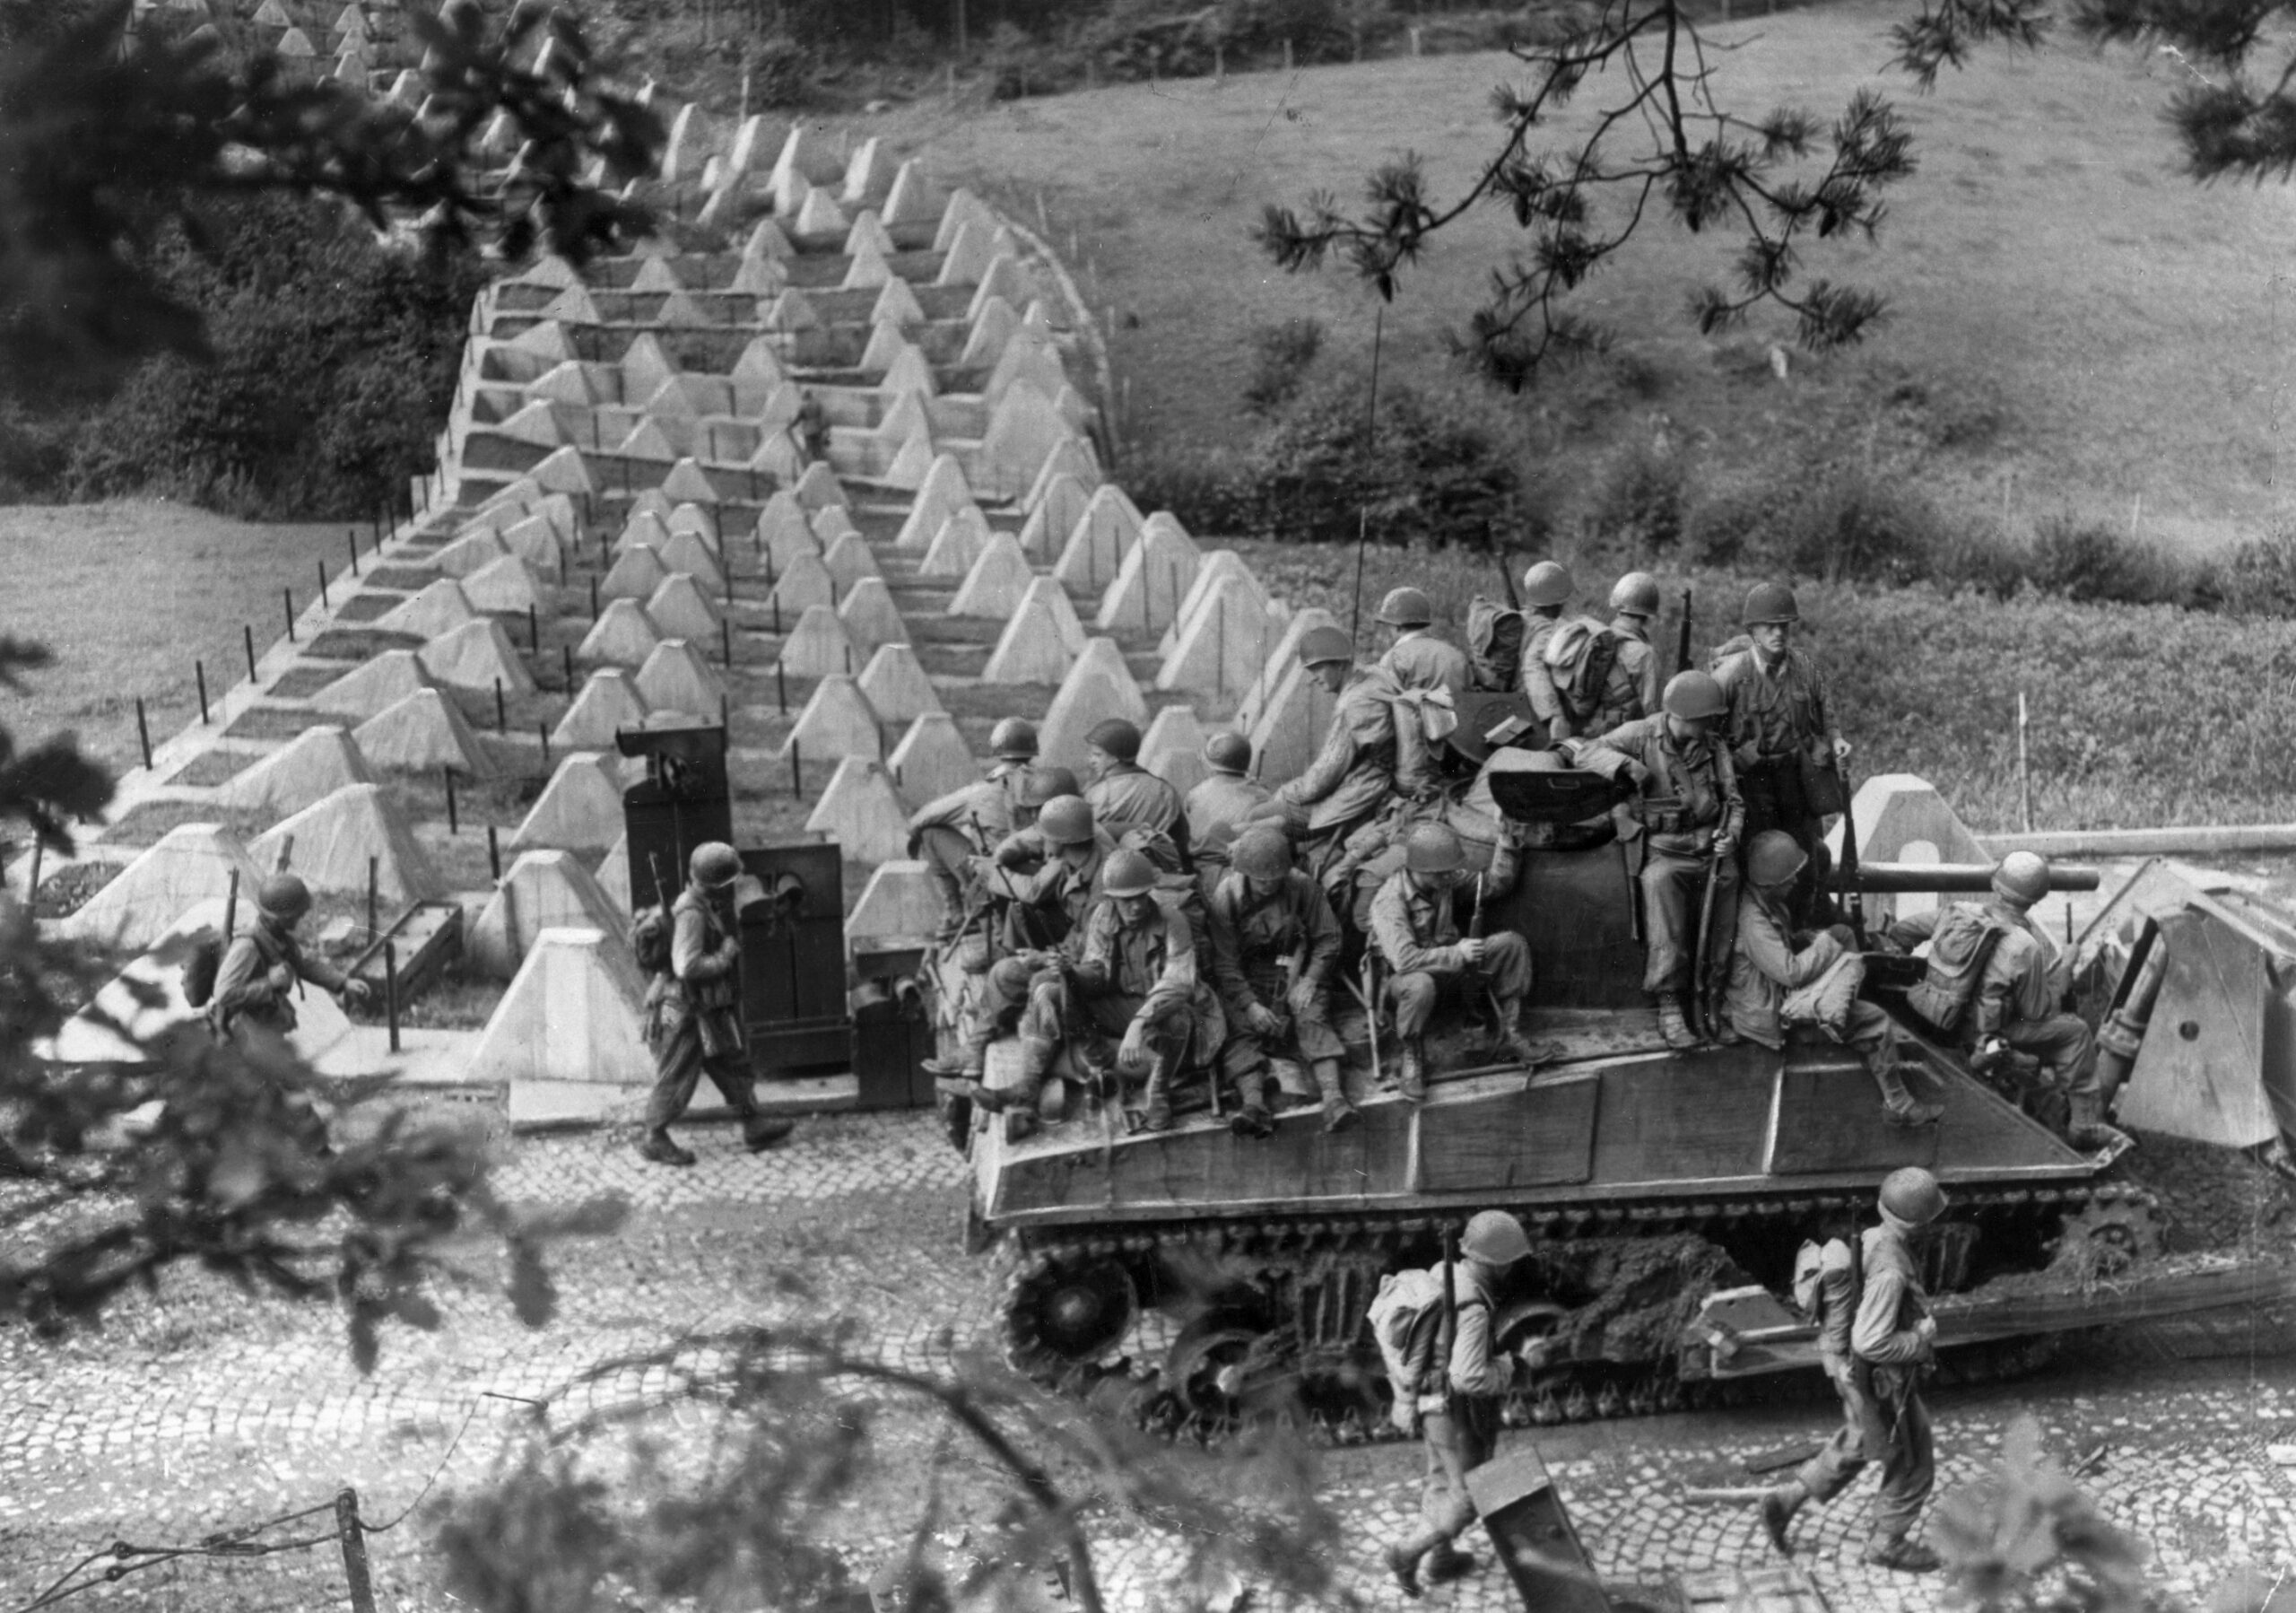 South of Aachen, American soldiers accompanied by an M-4 Sherman tank advance past “dragon’s teeth” tank obstacles on the Siegfried Line. Once inside the city, tanks lost much of the advantage of maneuver and firepower which they utilized in open country. (National Archives)